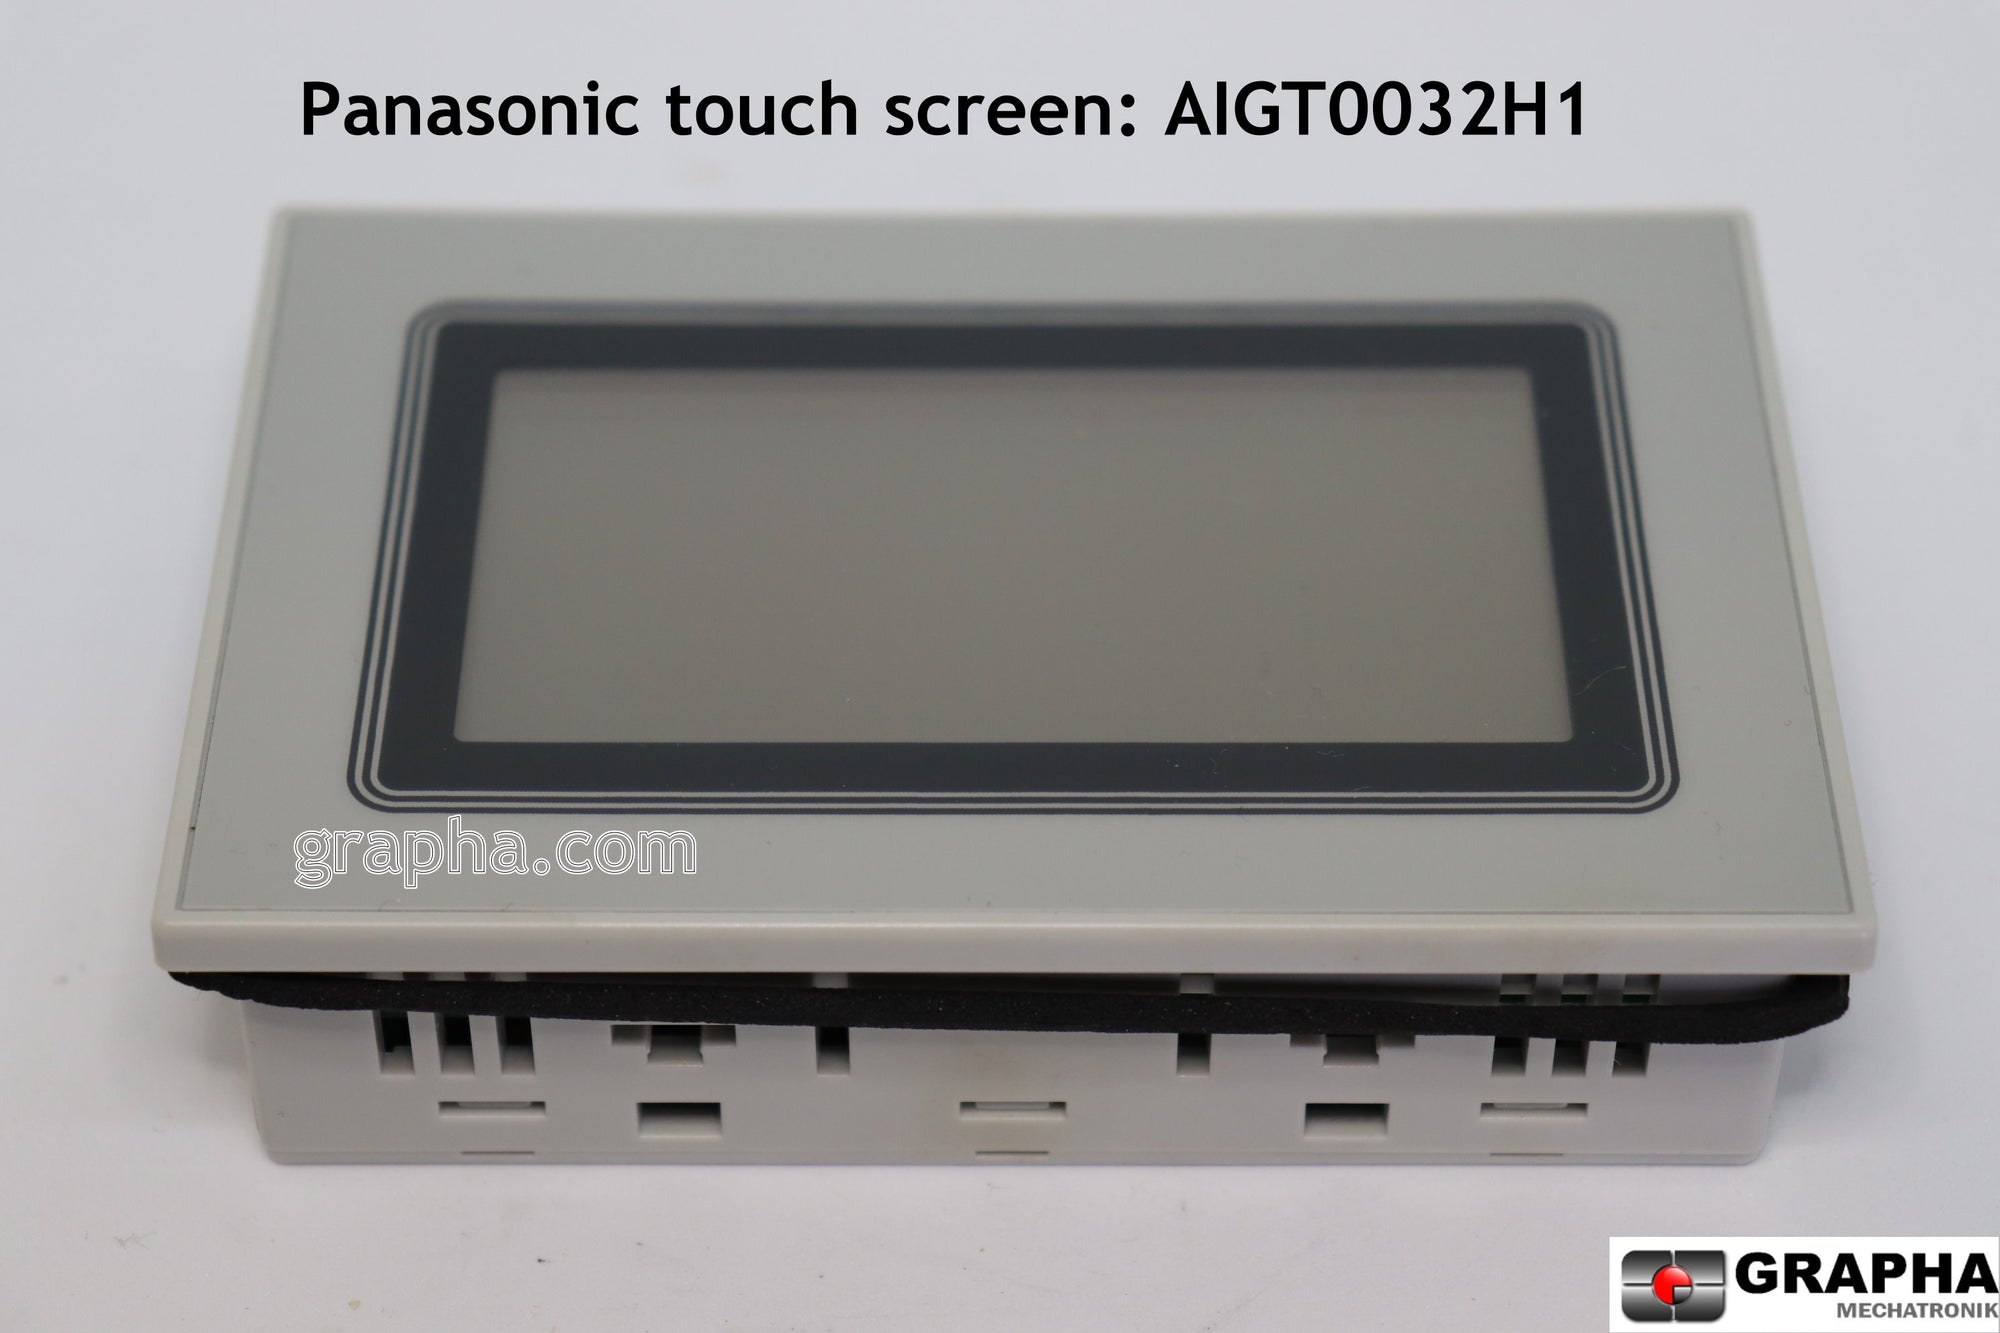 Panasonic touch screen: AIGT0032H1